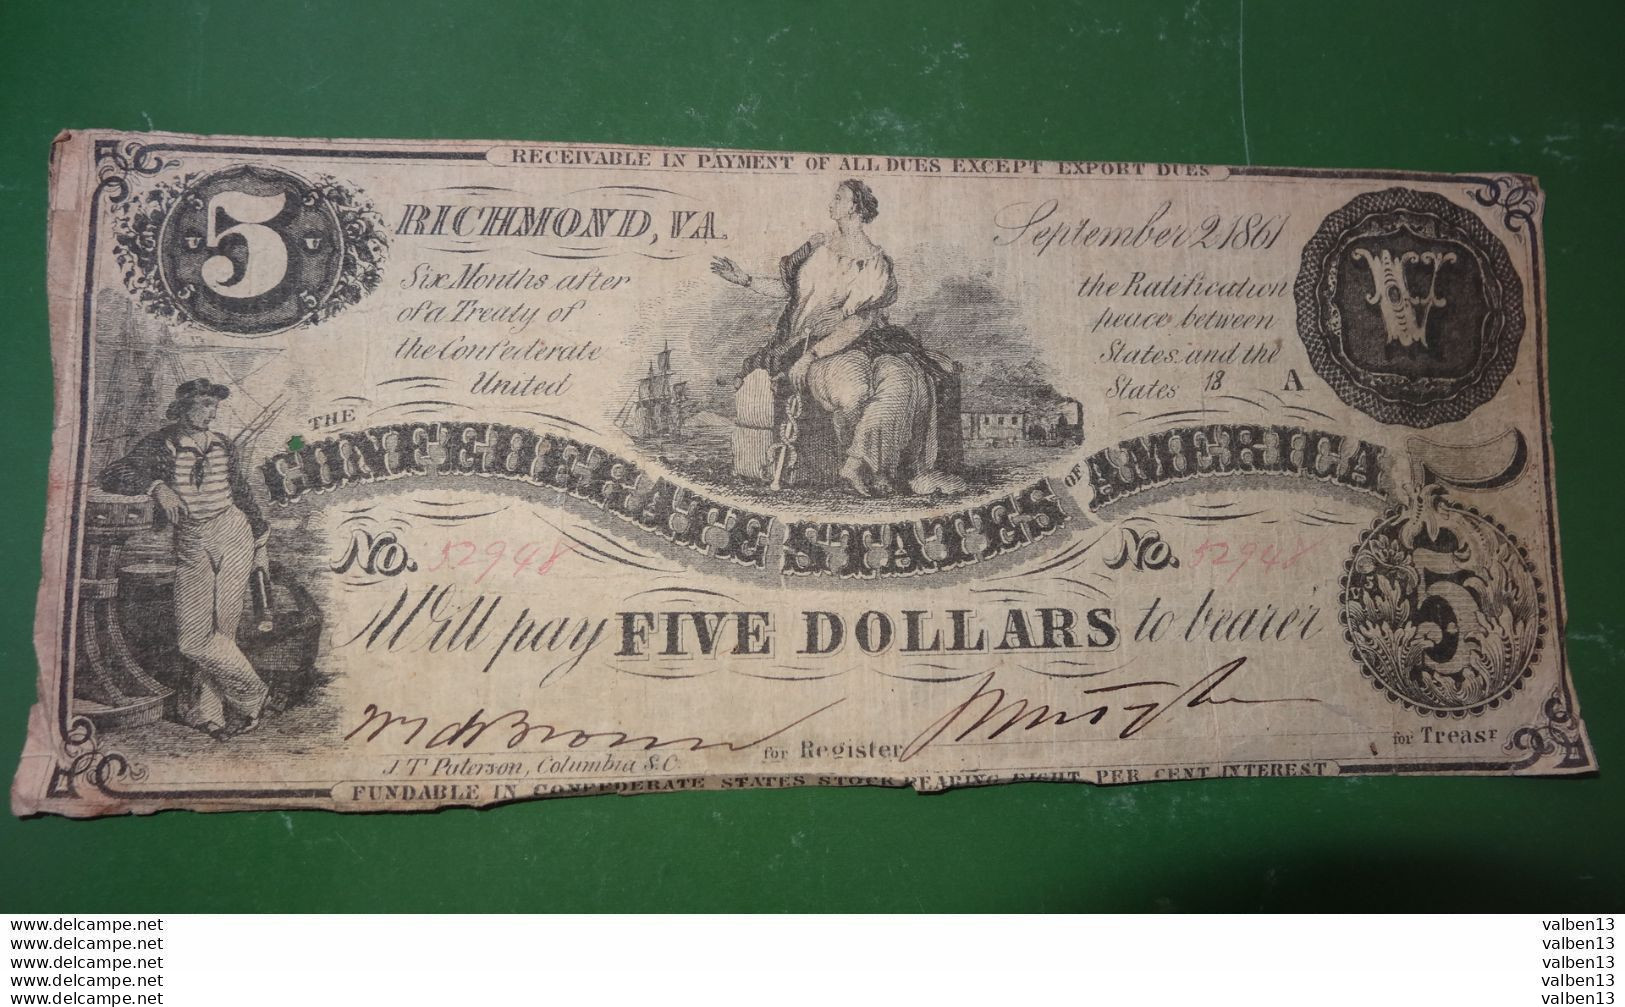 ETATS UNIS: Confederates States Of America. N° 52948, 5 Dollars. Date 02/09/1861 ........ Env.2 - Confederate Currency (1861-1864)